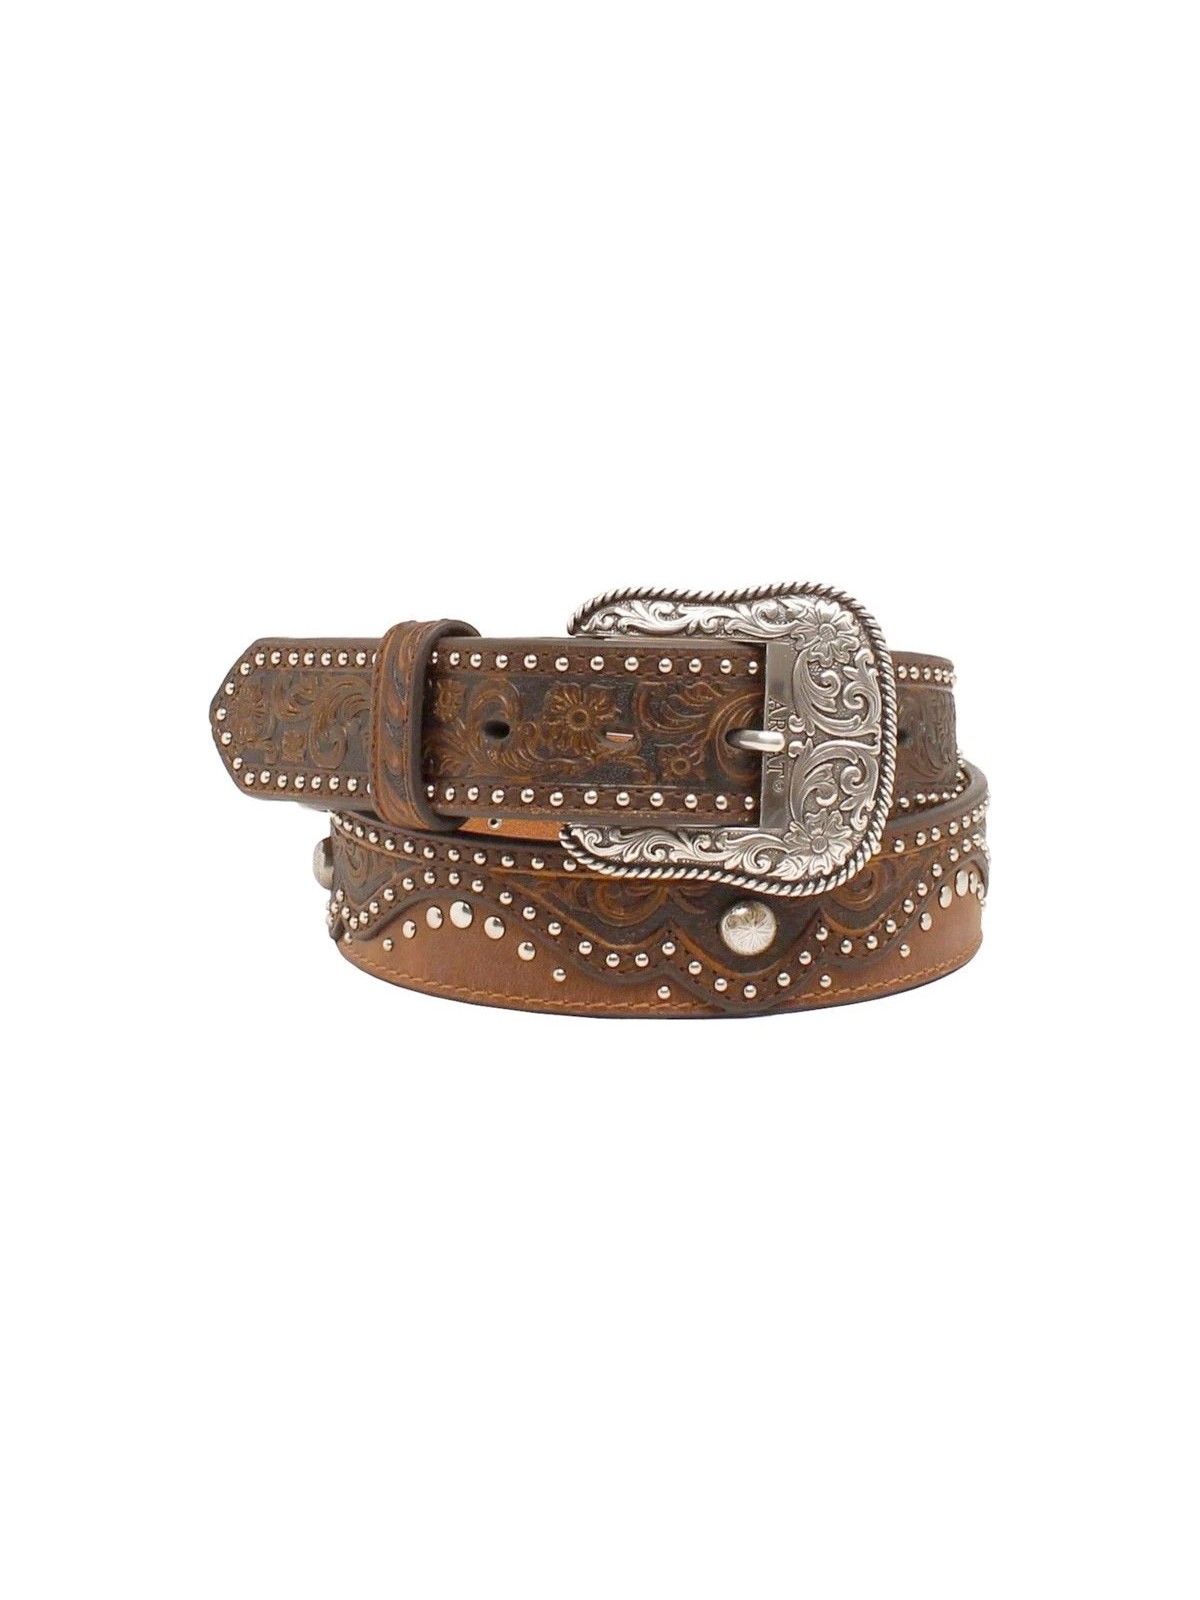 Ariat Brown Embossed Leather Belt